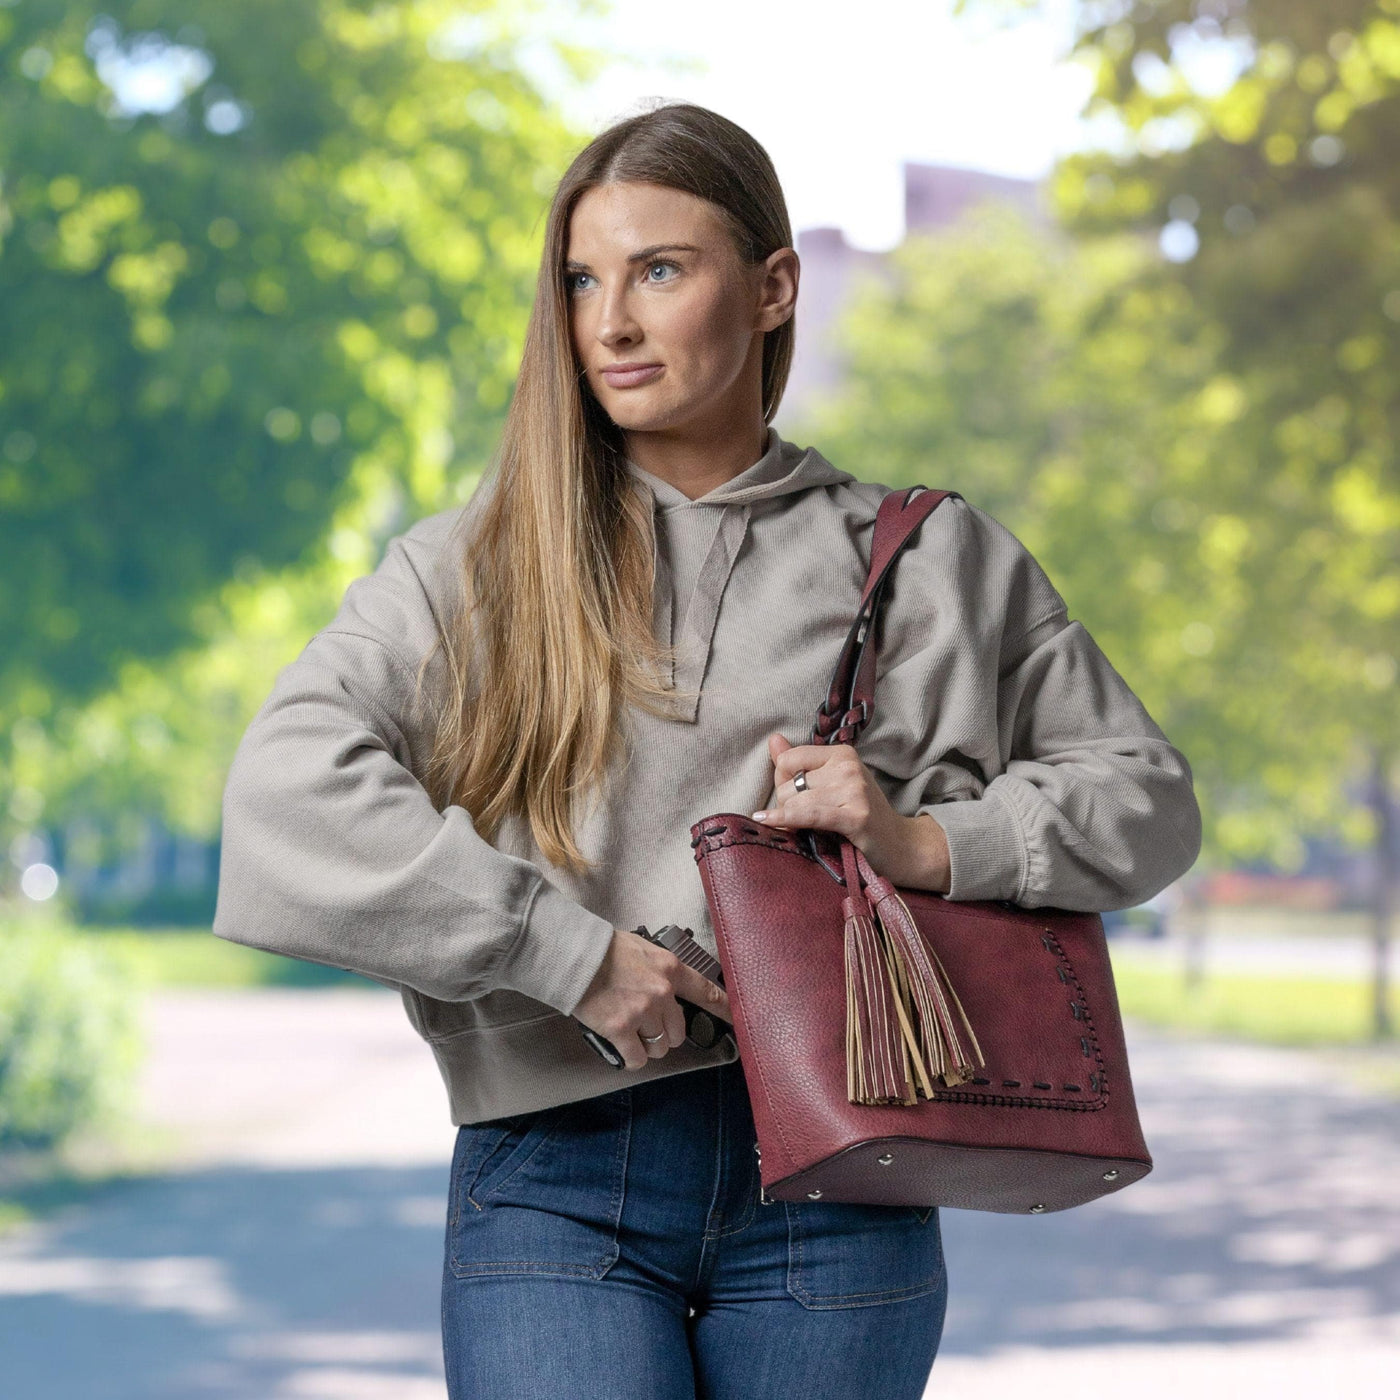 Sadie Leather Satchel | Concealed Carry Purses for Women –  www.itsinthebagboutique.com